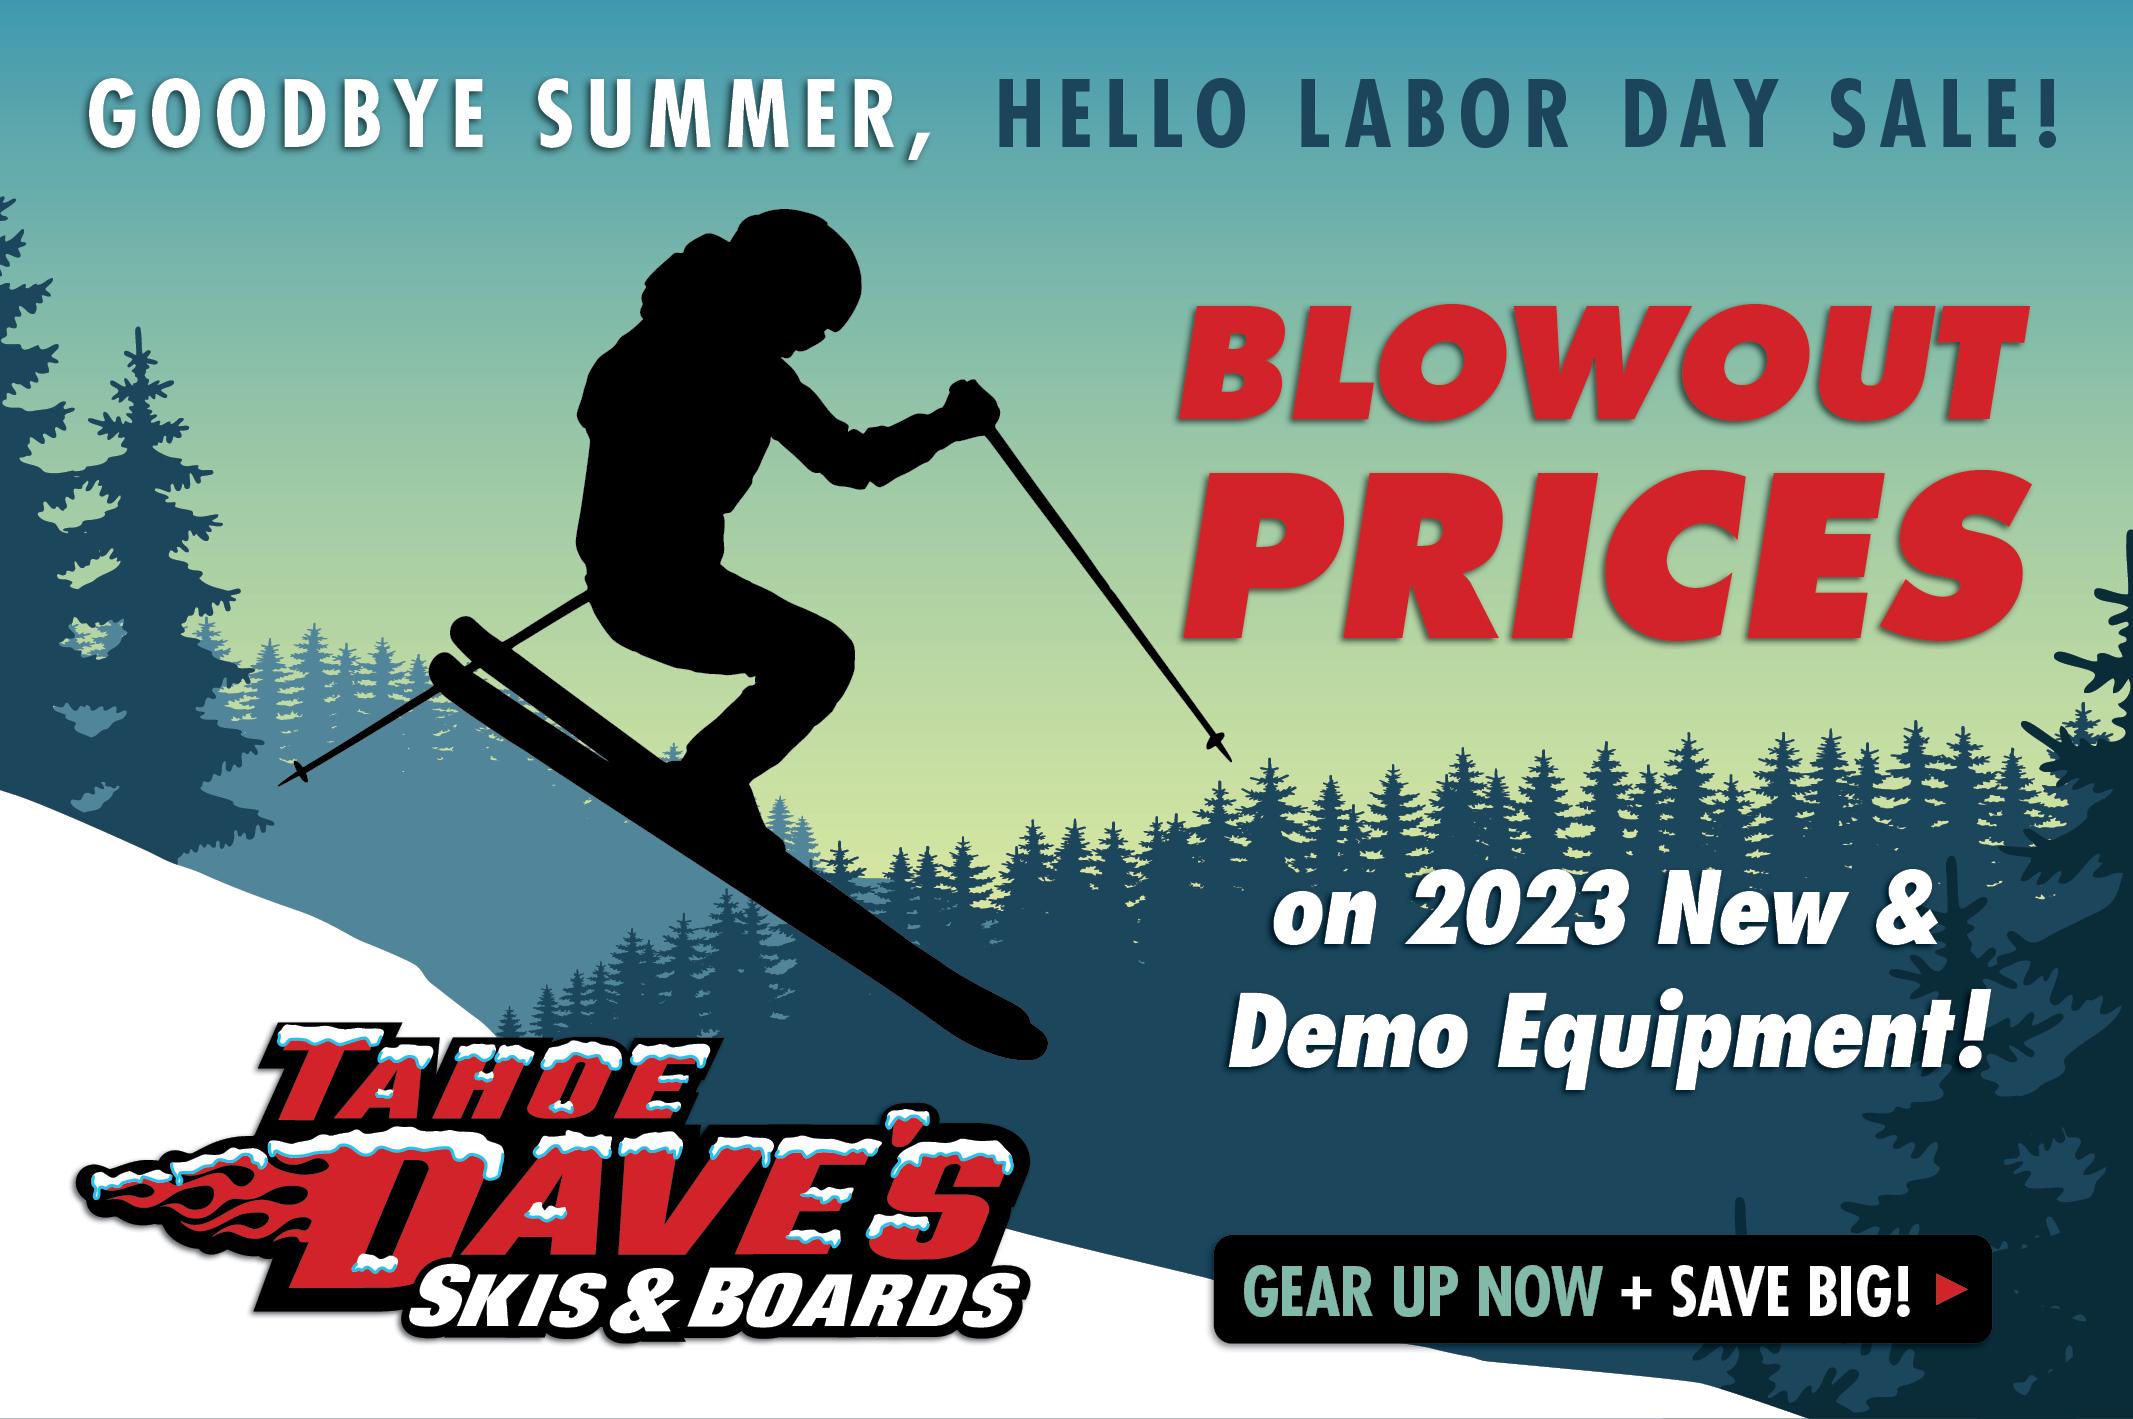 Enjoy Blowout Prices on 2023 Skis & Boards!